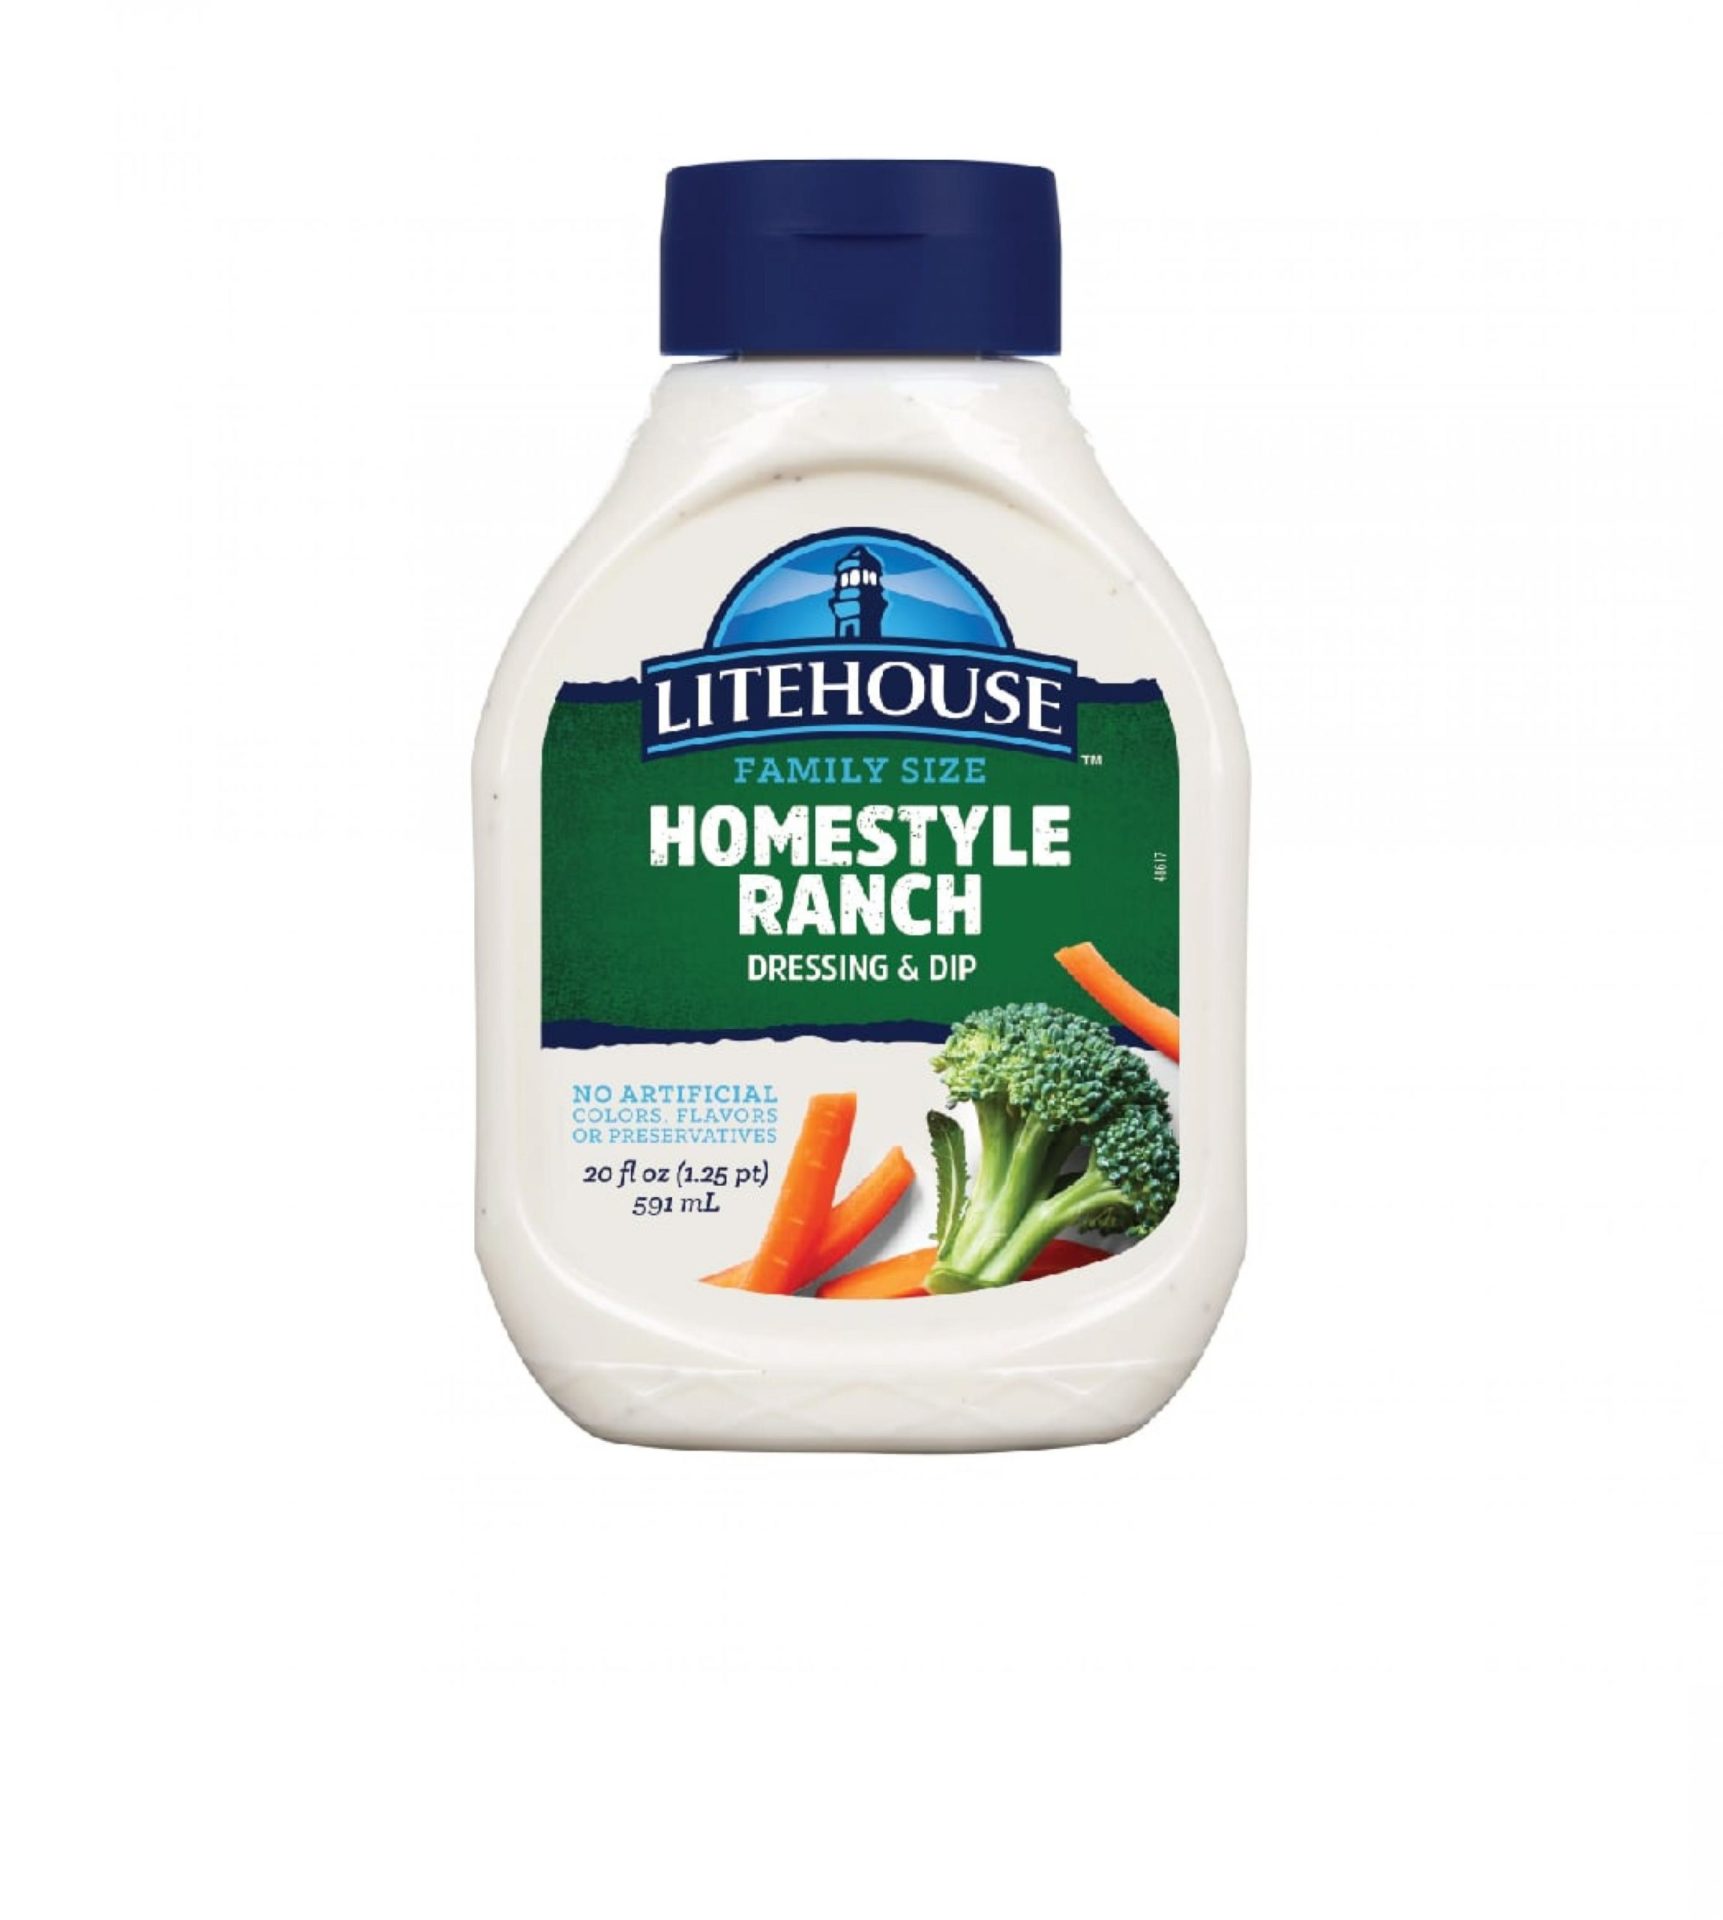 Find FAMILY SIZE HOMESTYLE RANCH